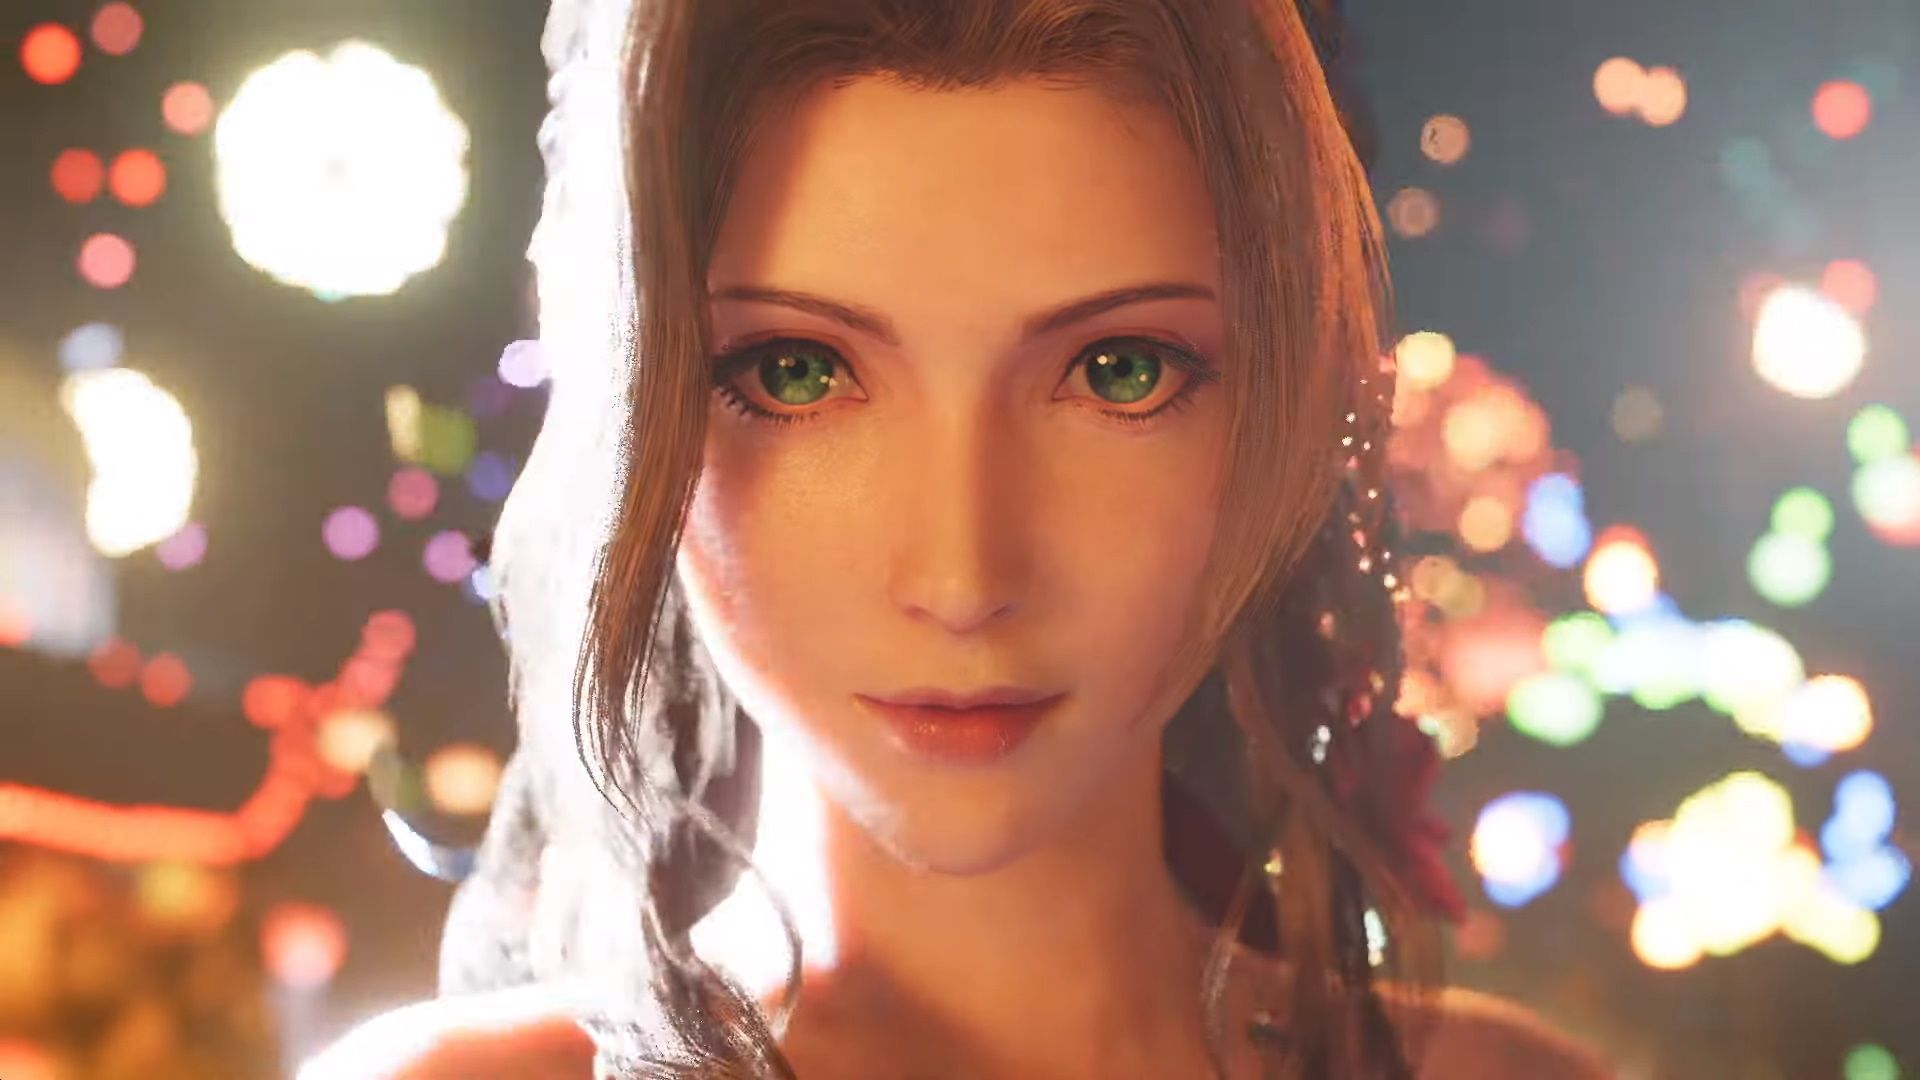 Final Fantasy 7 remake demo opening cinematic leaked in full